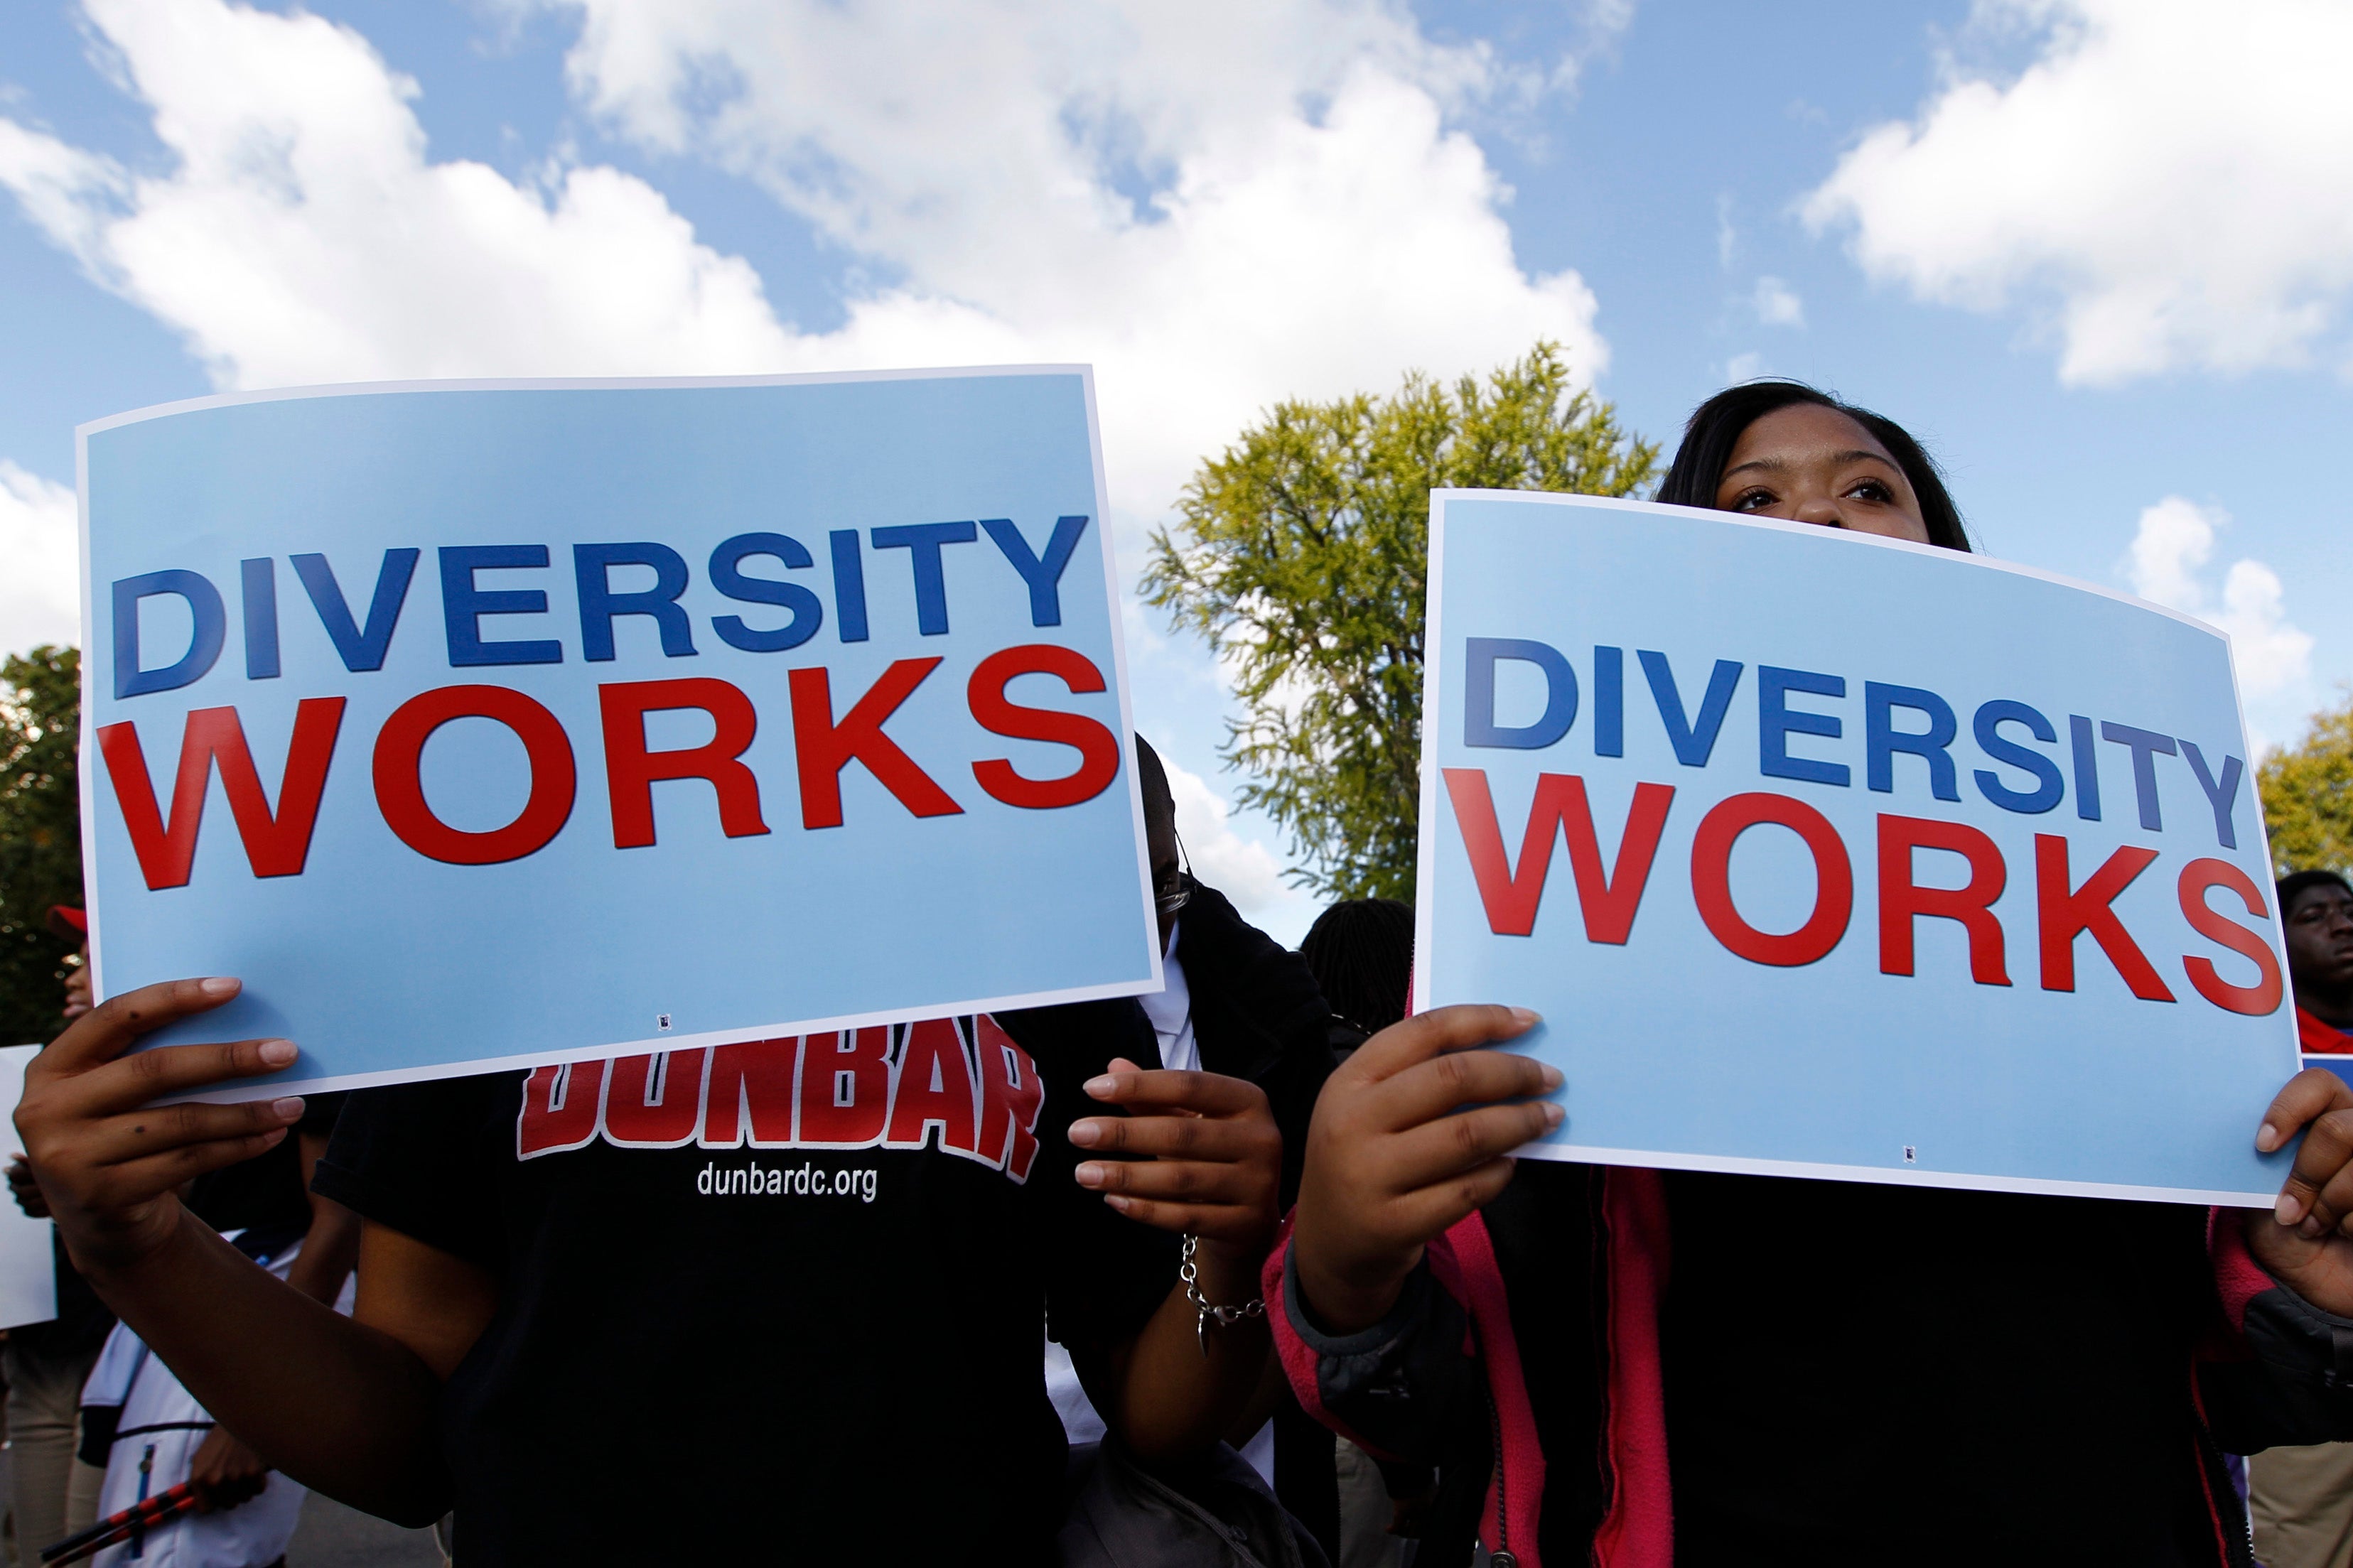 People hold up signs that say "Diversity Works" under a blue sky